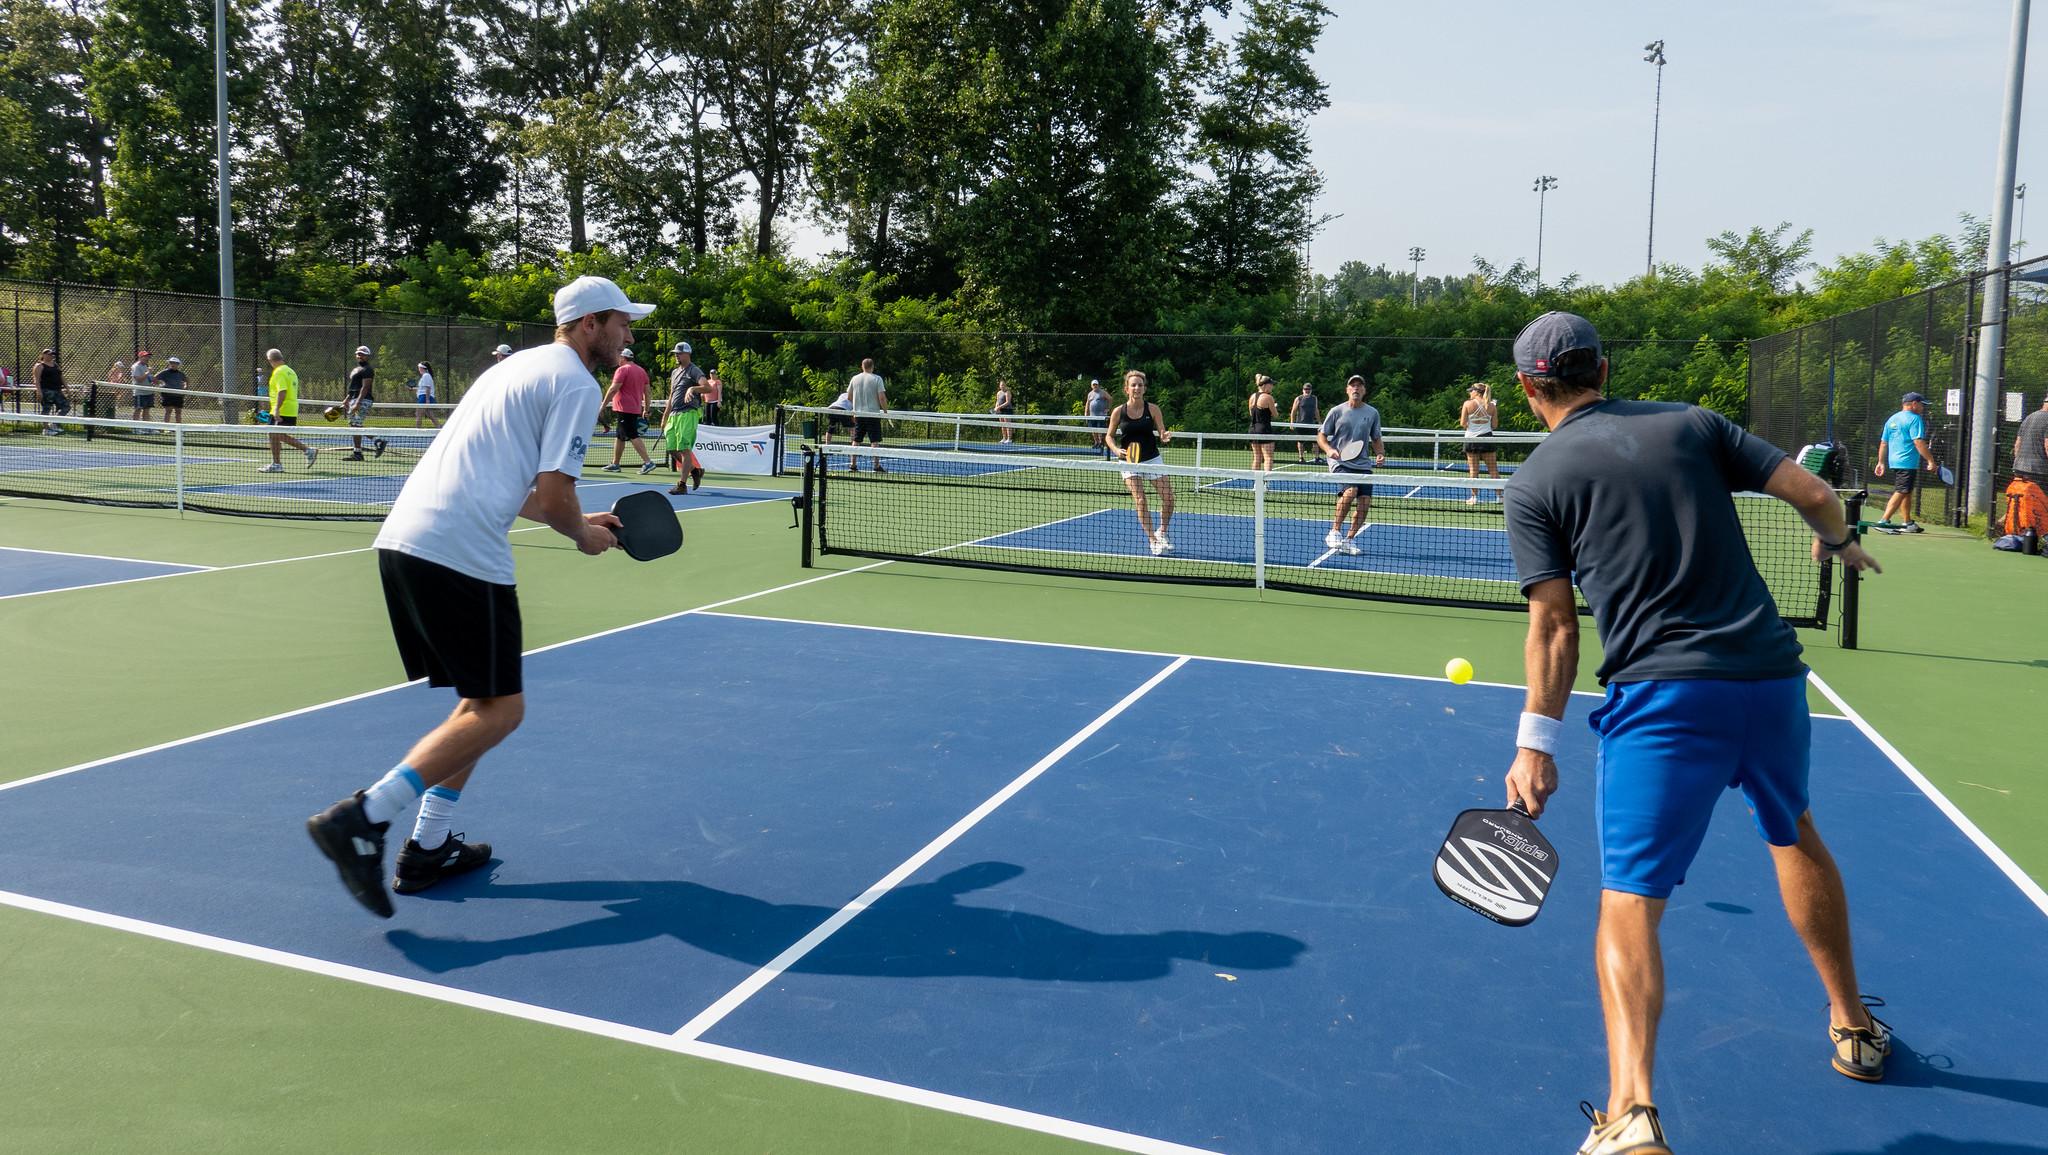 A group of people play pickleball in a sun filled court